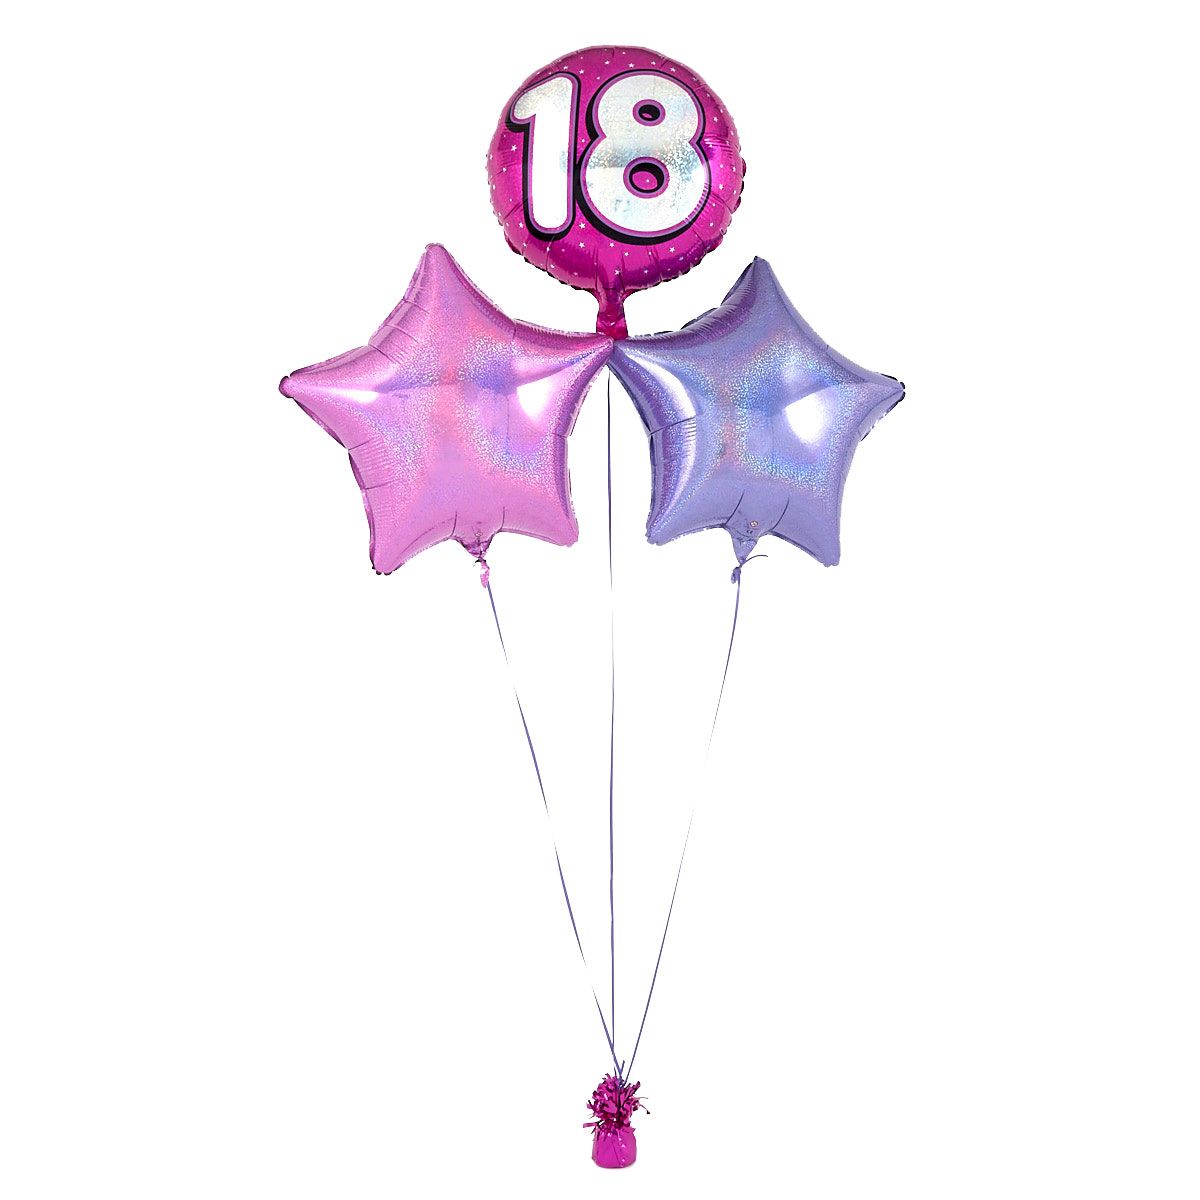 Pink 18th Birthday Balloon Bouquet - DELIVERED INFLATED!